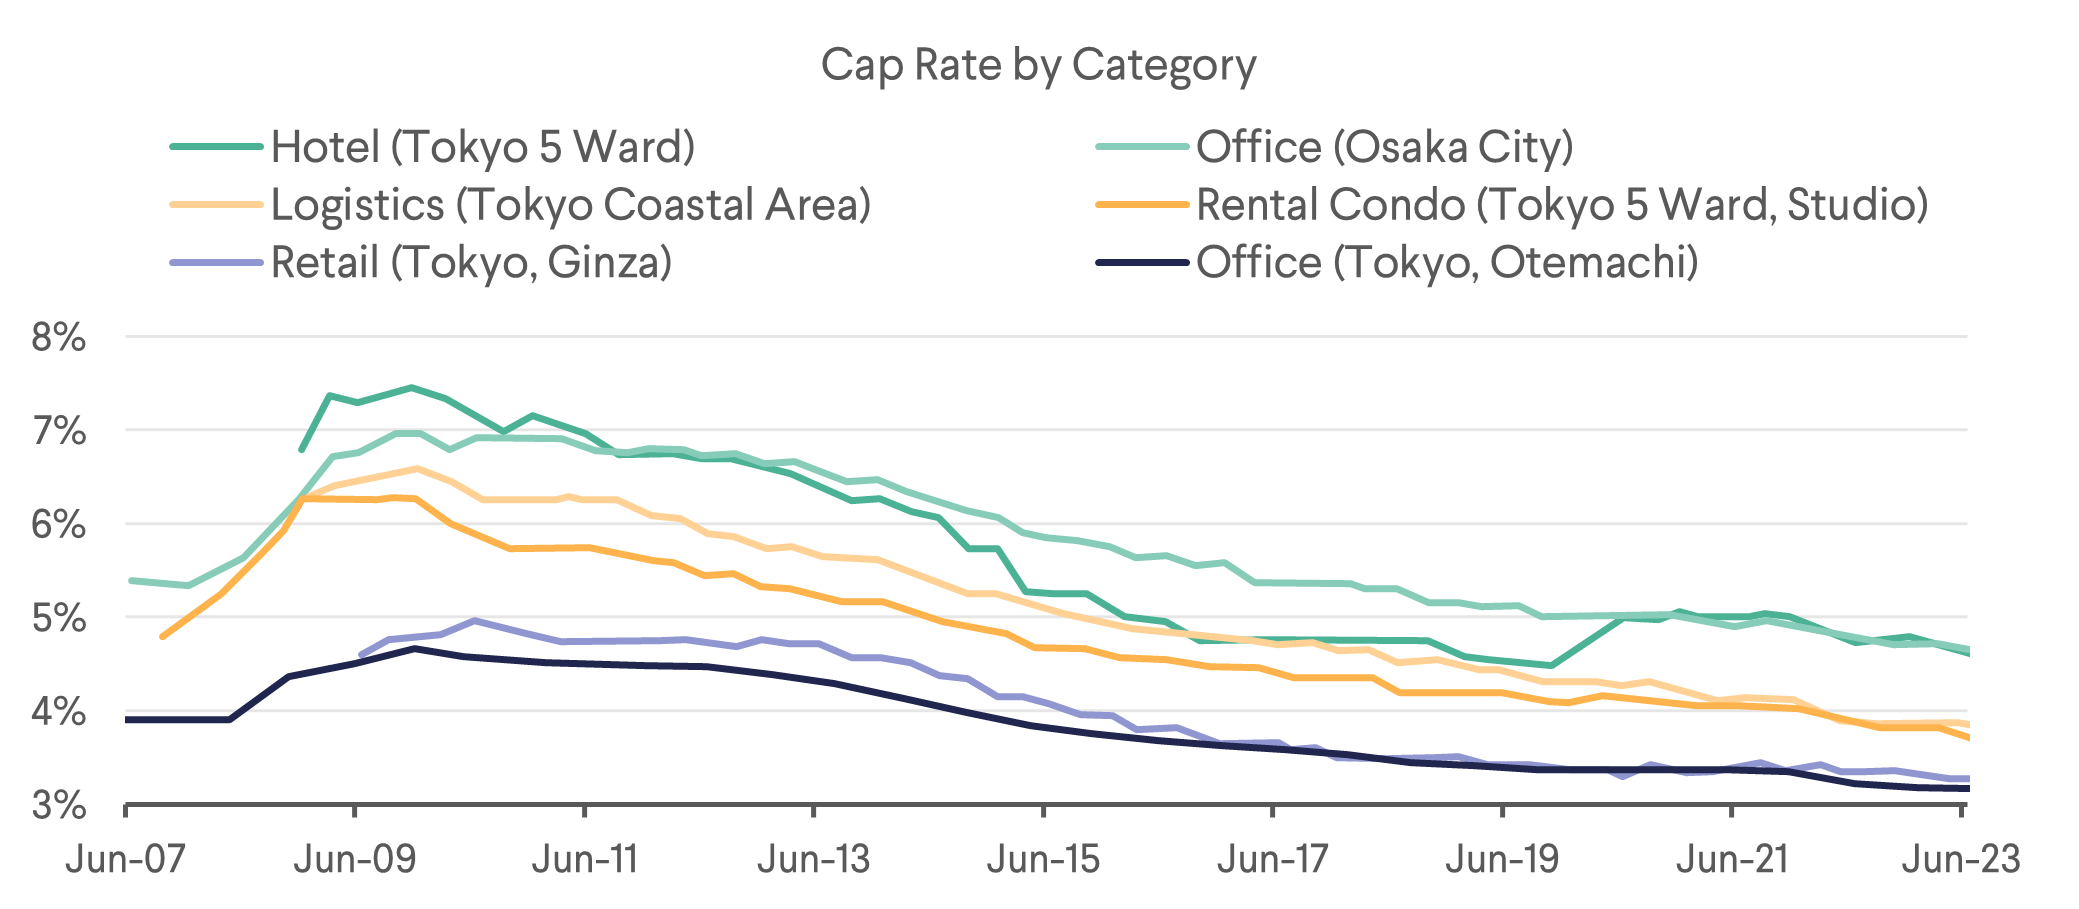 Cap Rate by Category